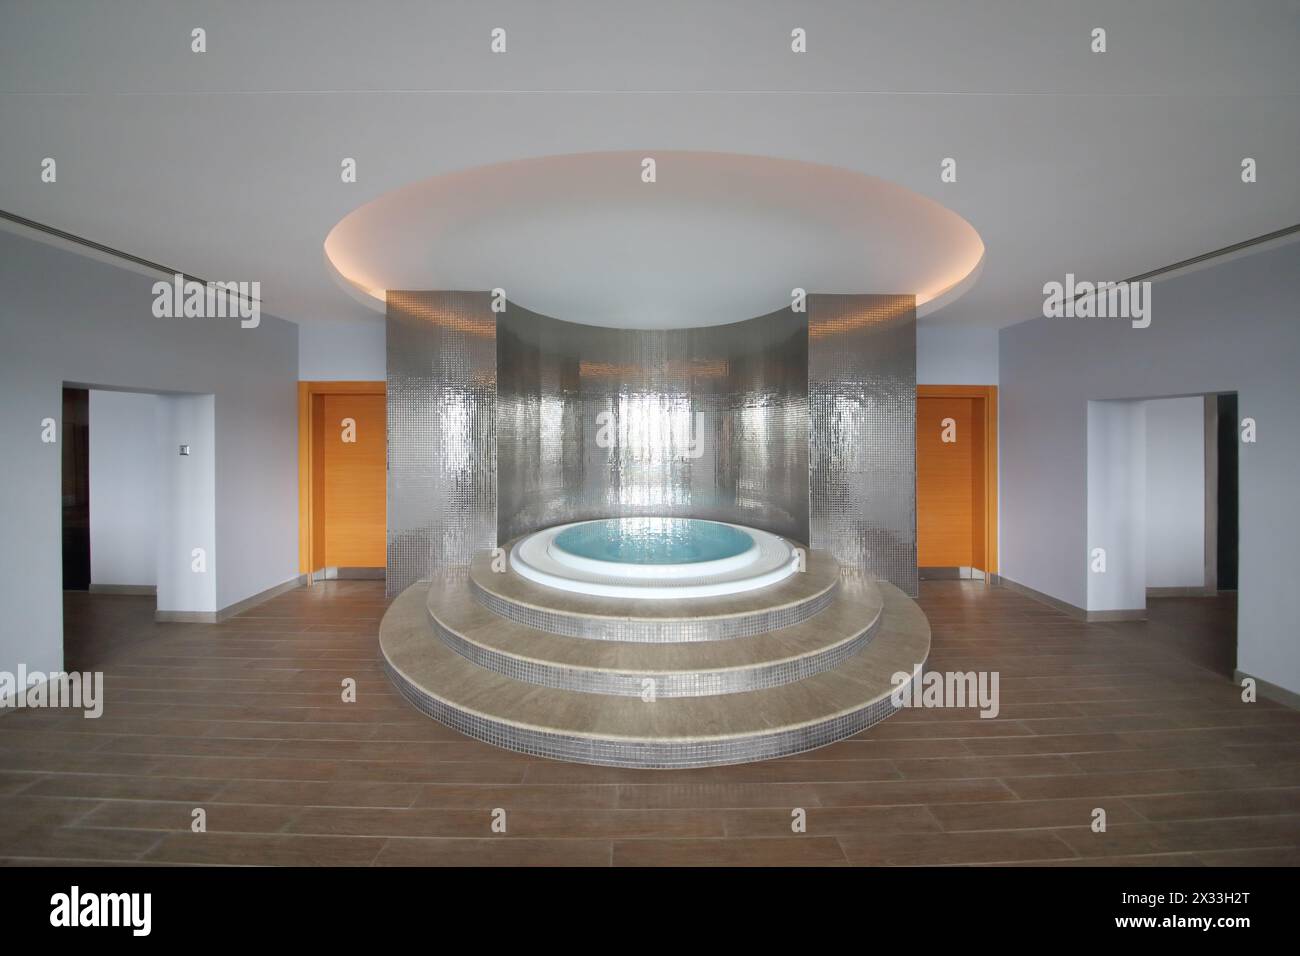 SOCHI, RUSSIA - JUL 27, 2014: The room with a round whirlpool in the center in Hotel Radisson Blu Paradise Resort and Spa Stock Photo